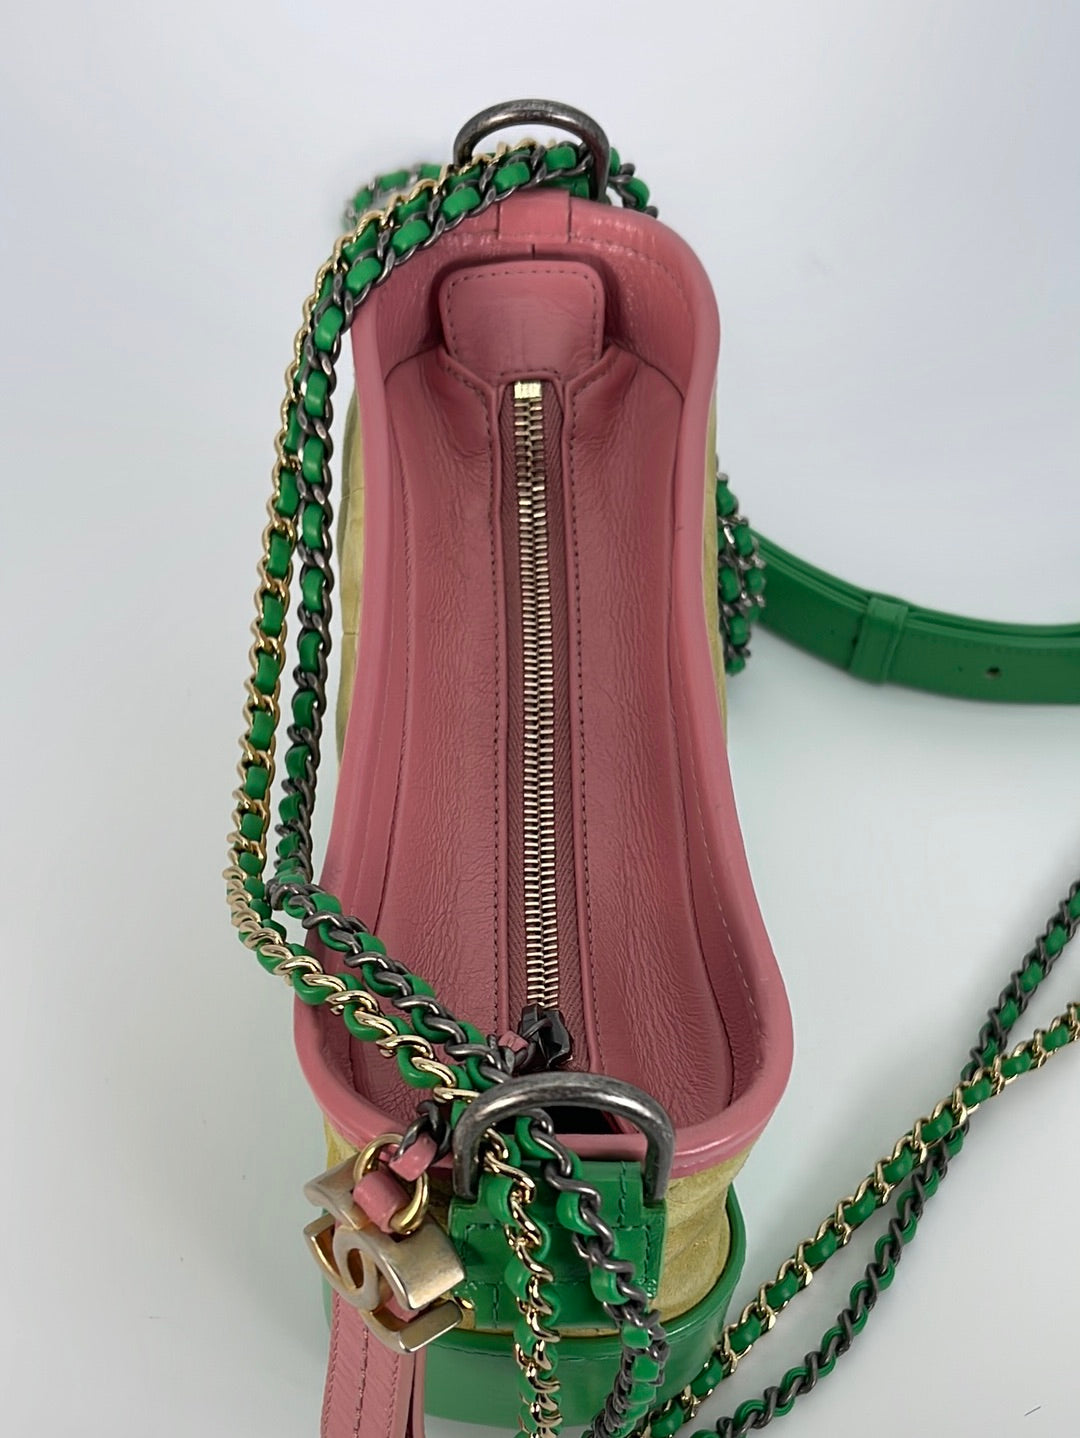 CHANEL Gabrielle Green Yellow Pink Leather Suede Chain Shoulder Crossbody  Bag